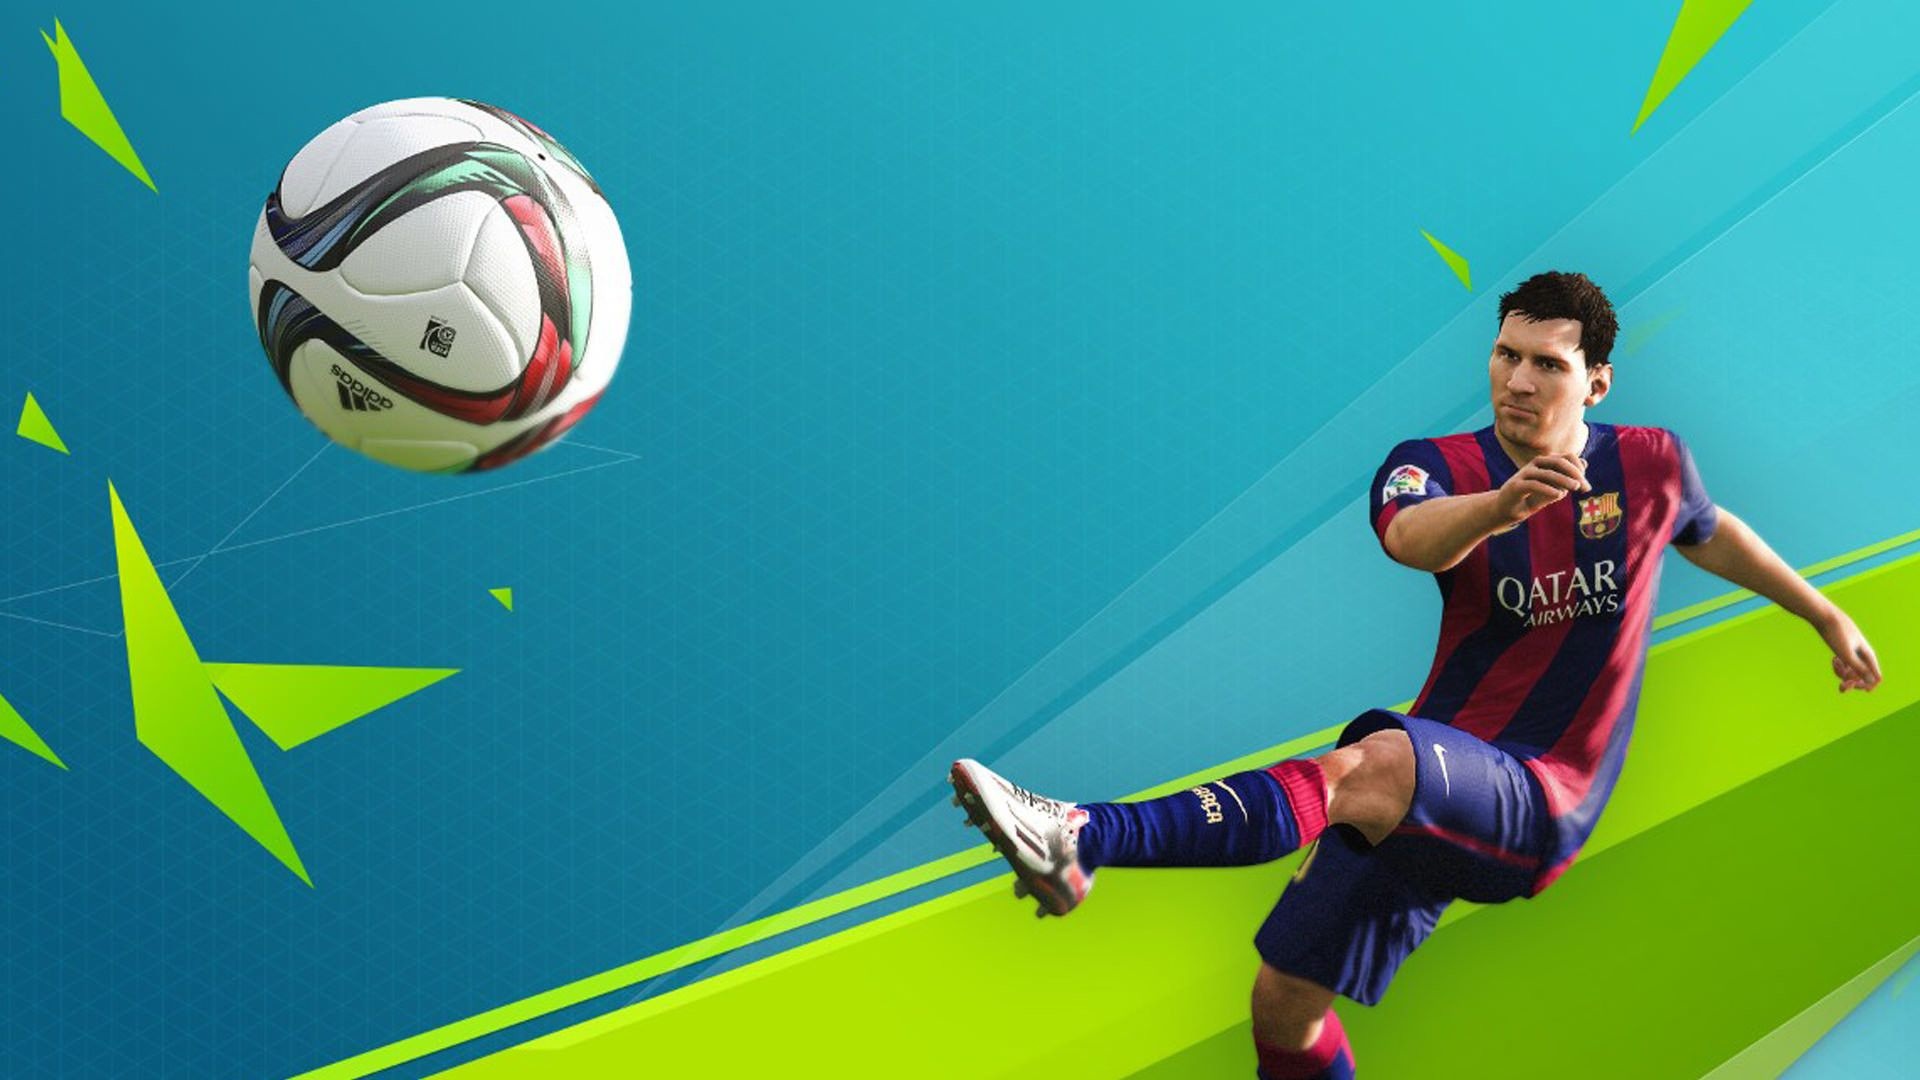 Soccer games wallpapers, Ultimate football experience, Immersive gameplay, Stunning visuals, 1920x1080 Full HD Desktop